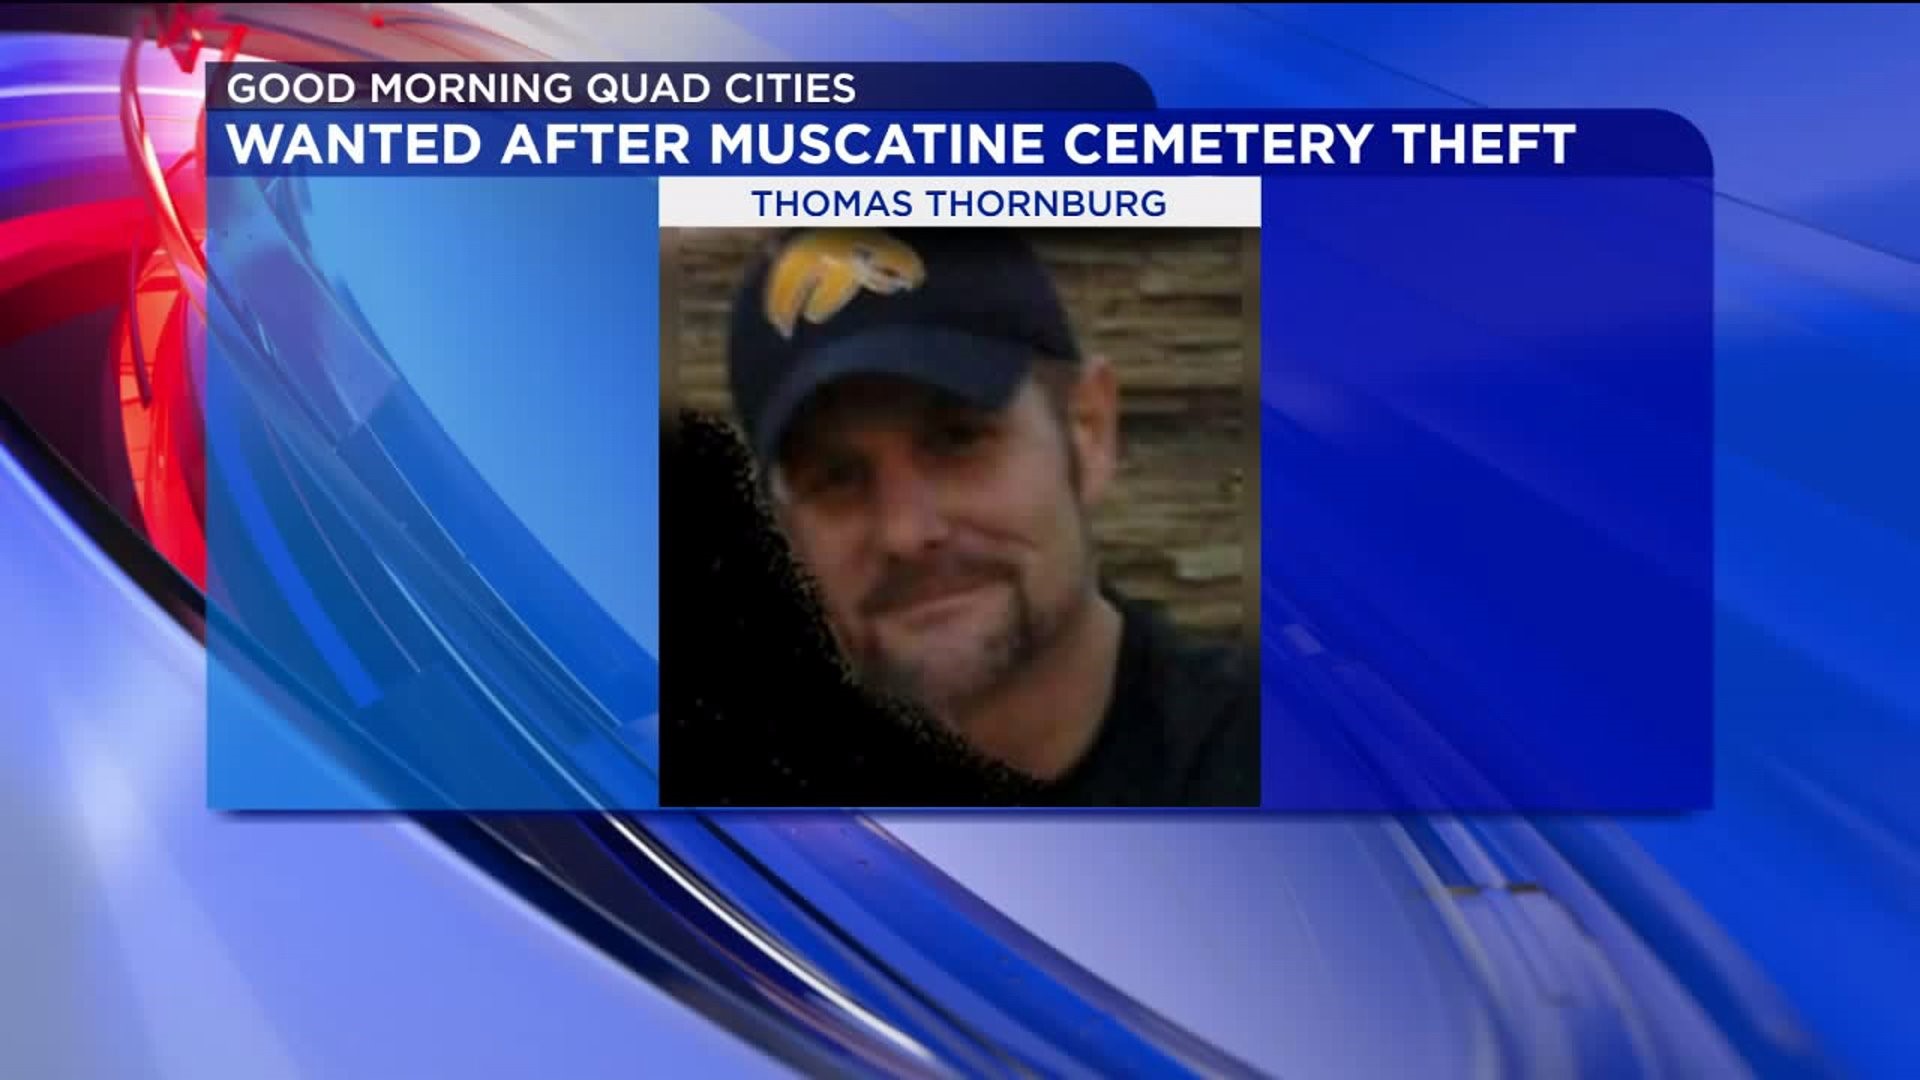 Wanted After Muscatine Cemetery Theft